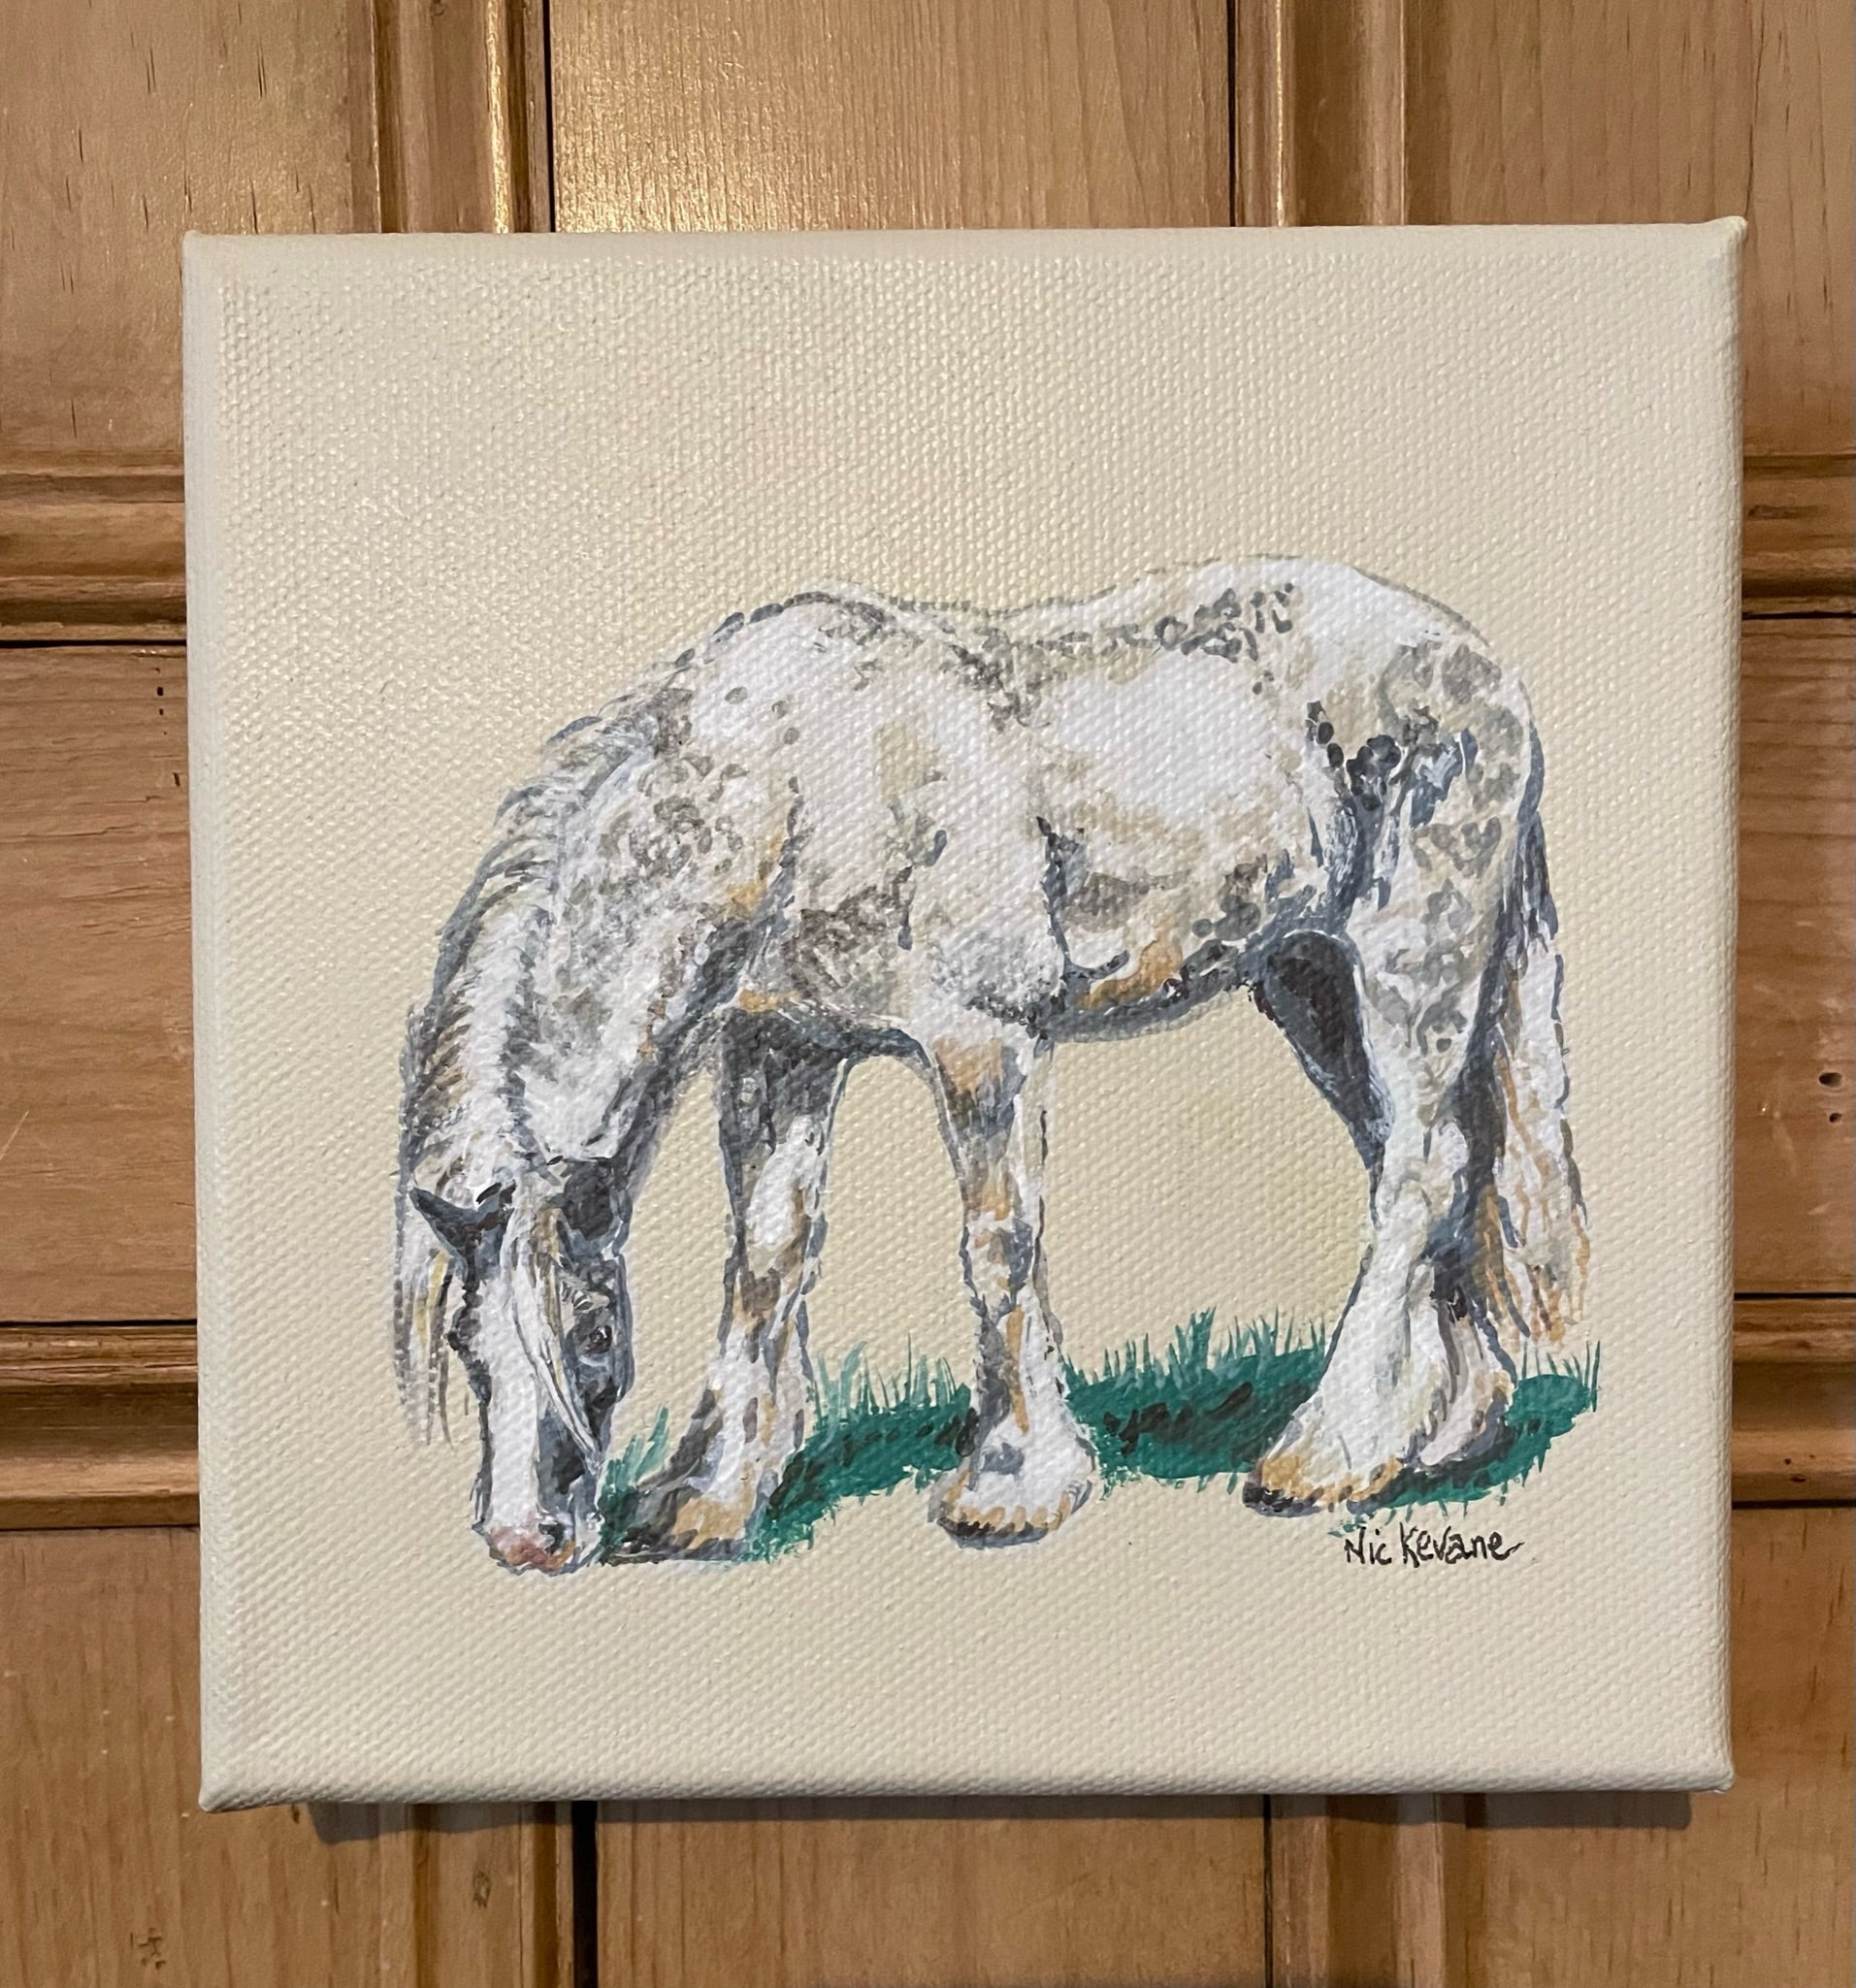 Dappled Grey Horse - 15cm x 15cm mini paintings depicting various countryside subjects.